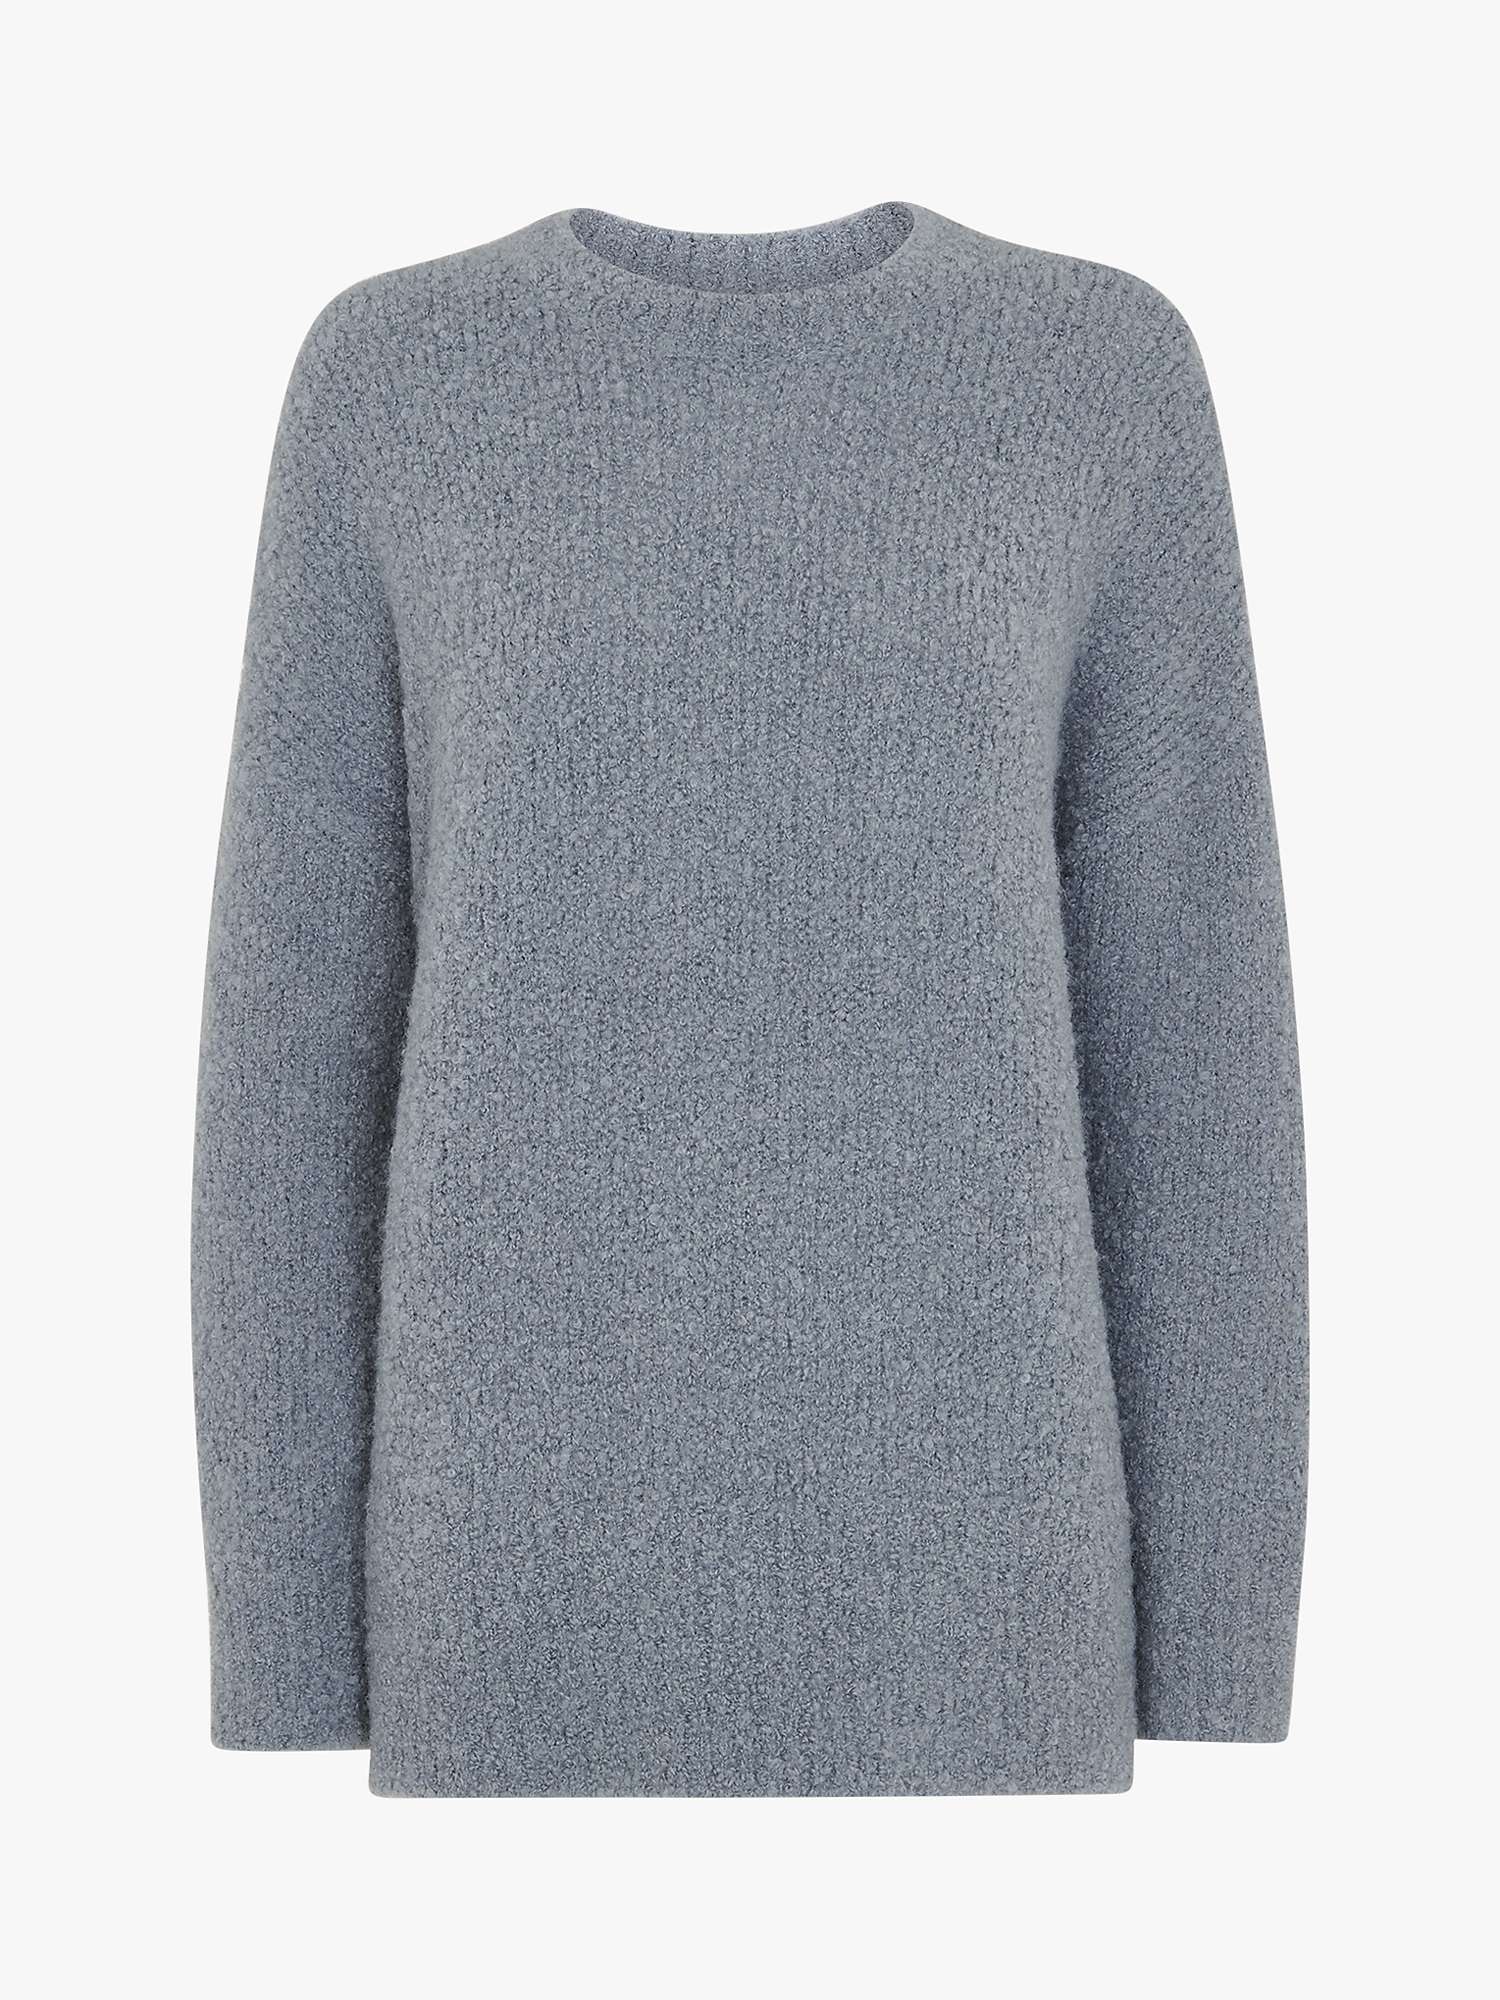 Whistles Relaxed Boucle Wool Blend Jumper, Grey at John Lewis & Partners